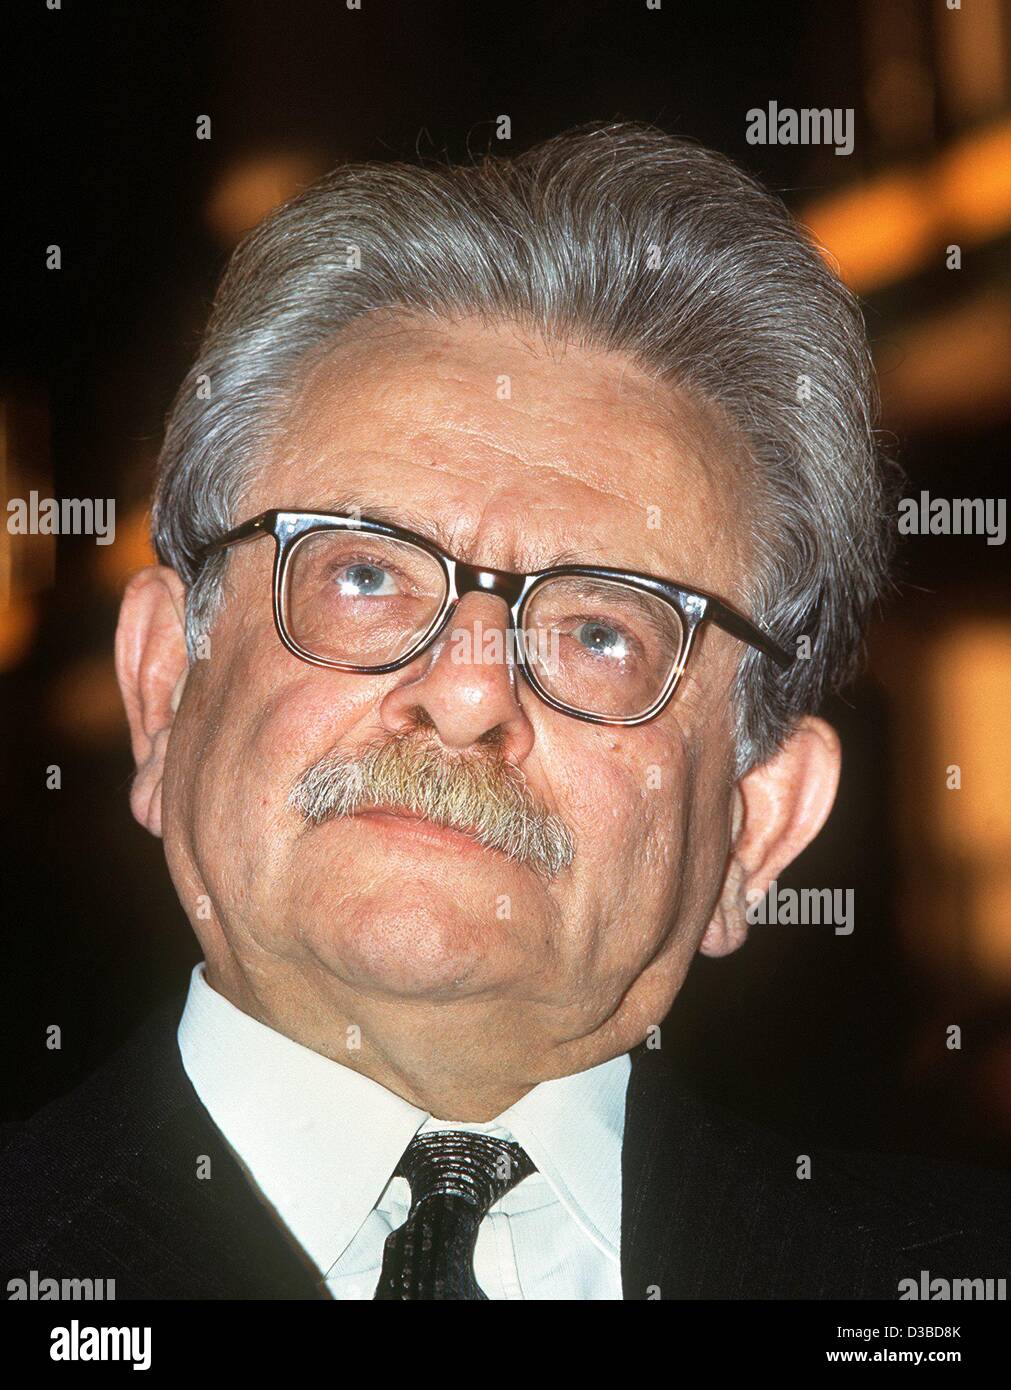 (dpa files) - Elias Canetti, German-language author of Bulgarian descent, pictured in Darmstadt, Germany, October 1972. He was born on 25 July 1905 in Rustschuk (now Ruse), Bulgaria, into a Jewish family who spoke old Spanish. When Canetti was six, his family moved to Manchester, England. After the  Stock Photo